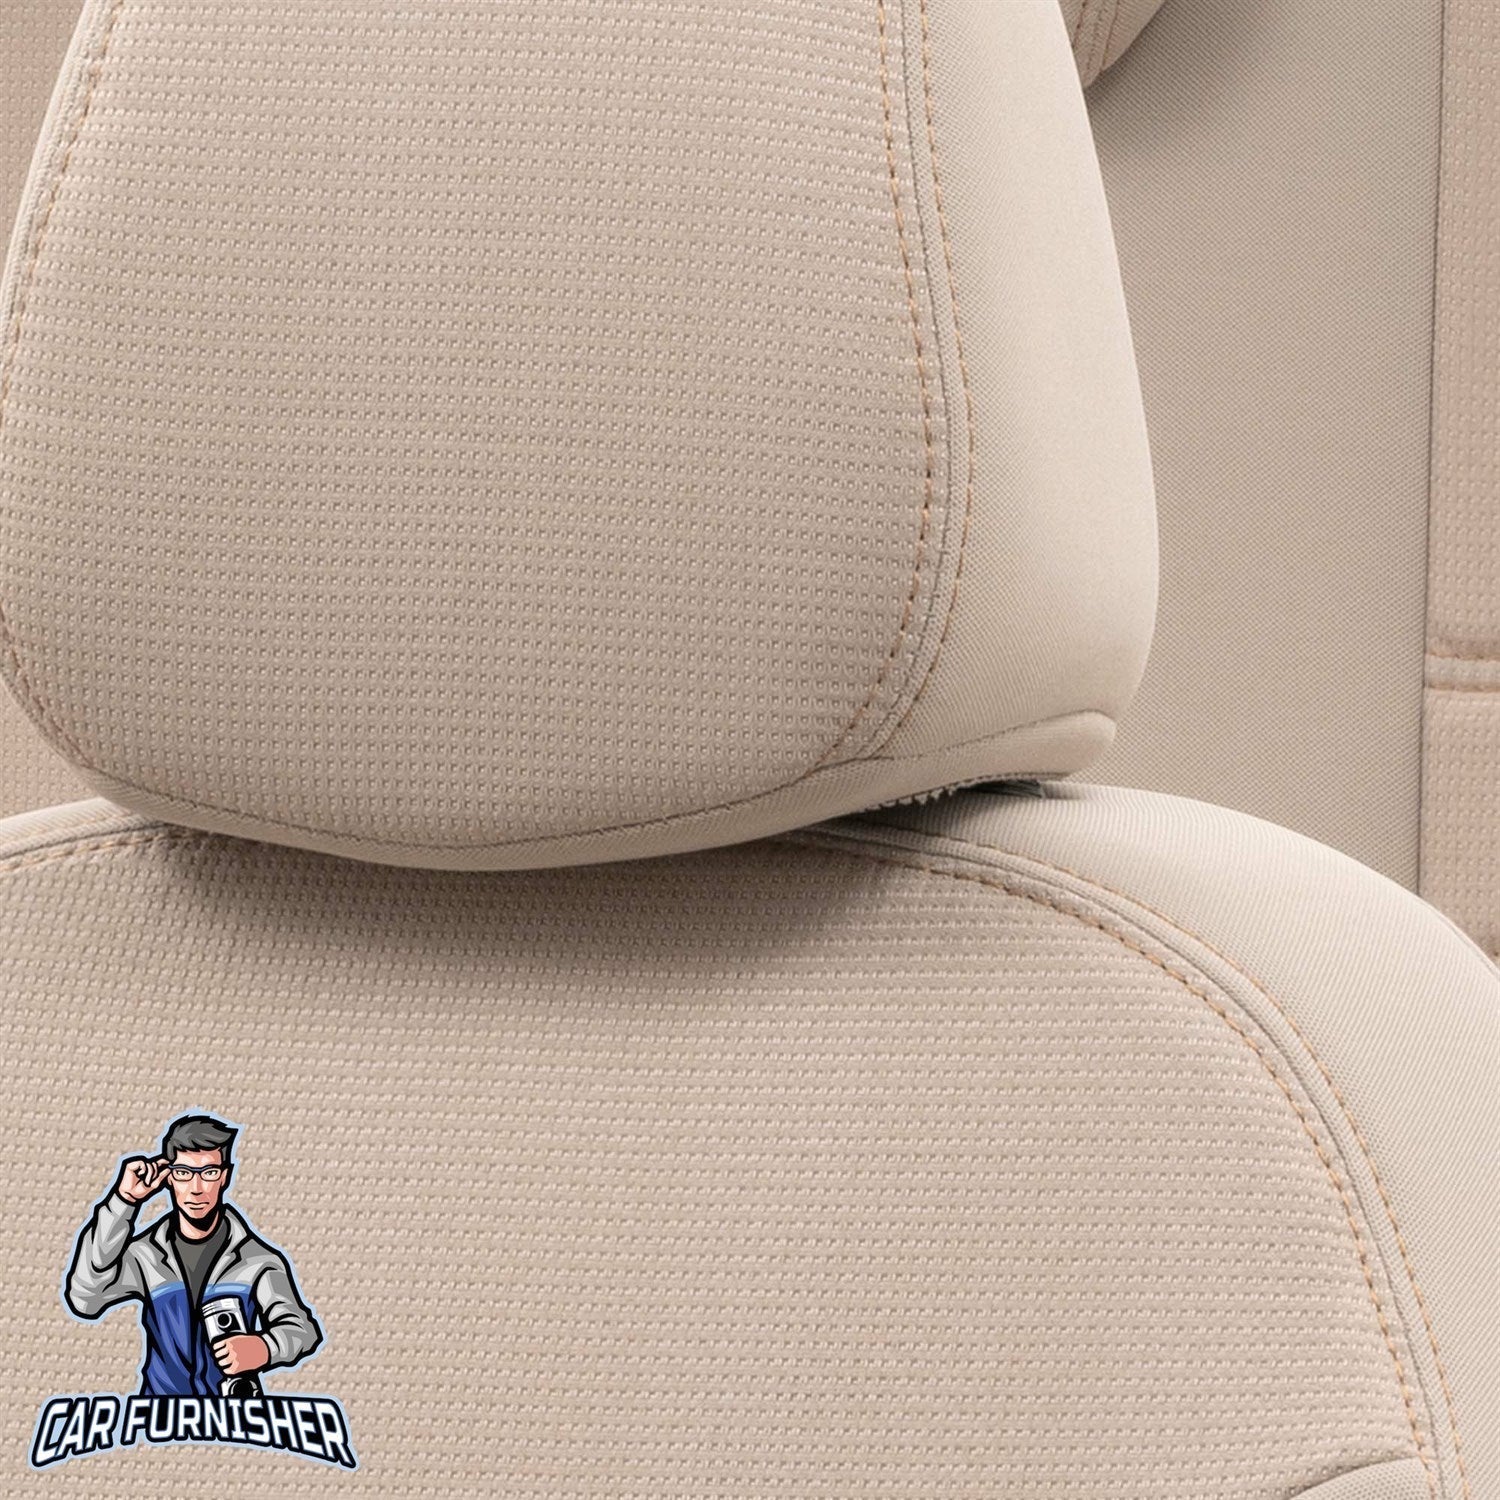 Nissan NV300 Seat Cover New York Leather Design Beige Jacquard Fabric